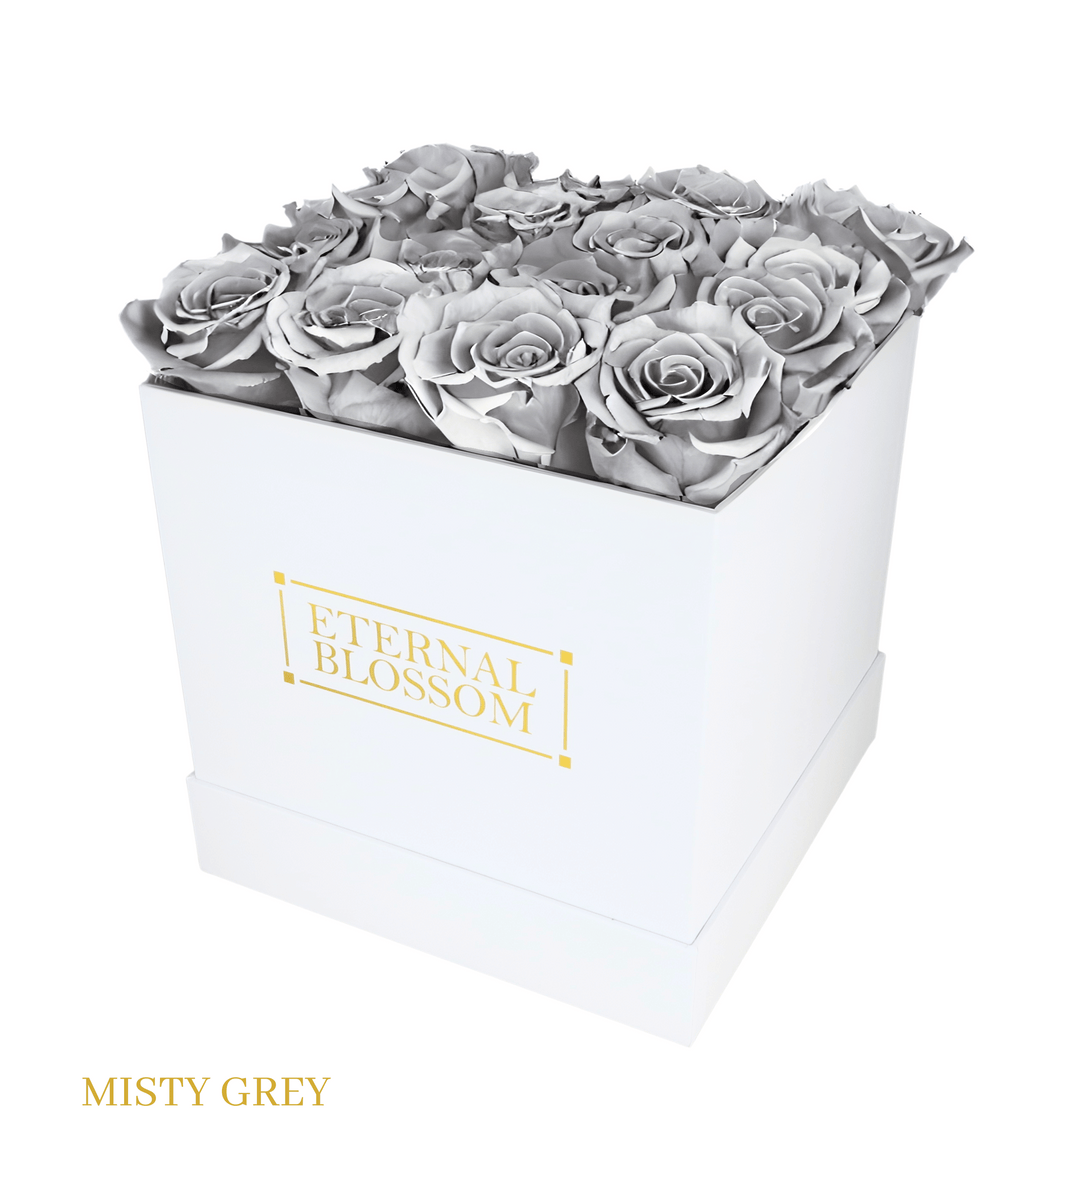 16 Piece Blossom Box - White Box - All Colours of Year Lasting Infinity Roses